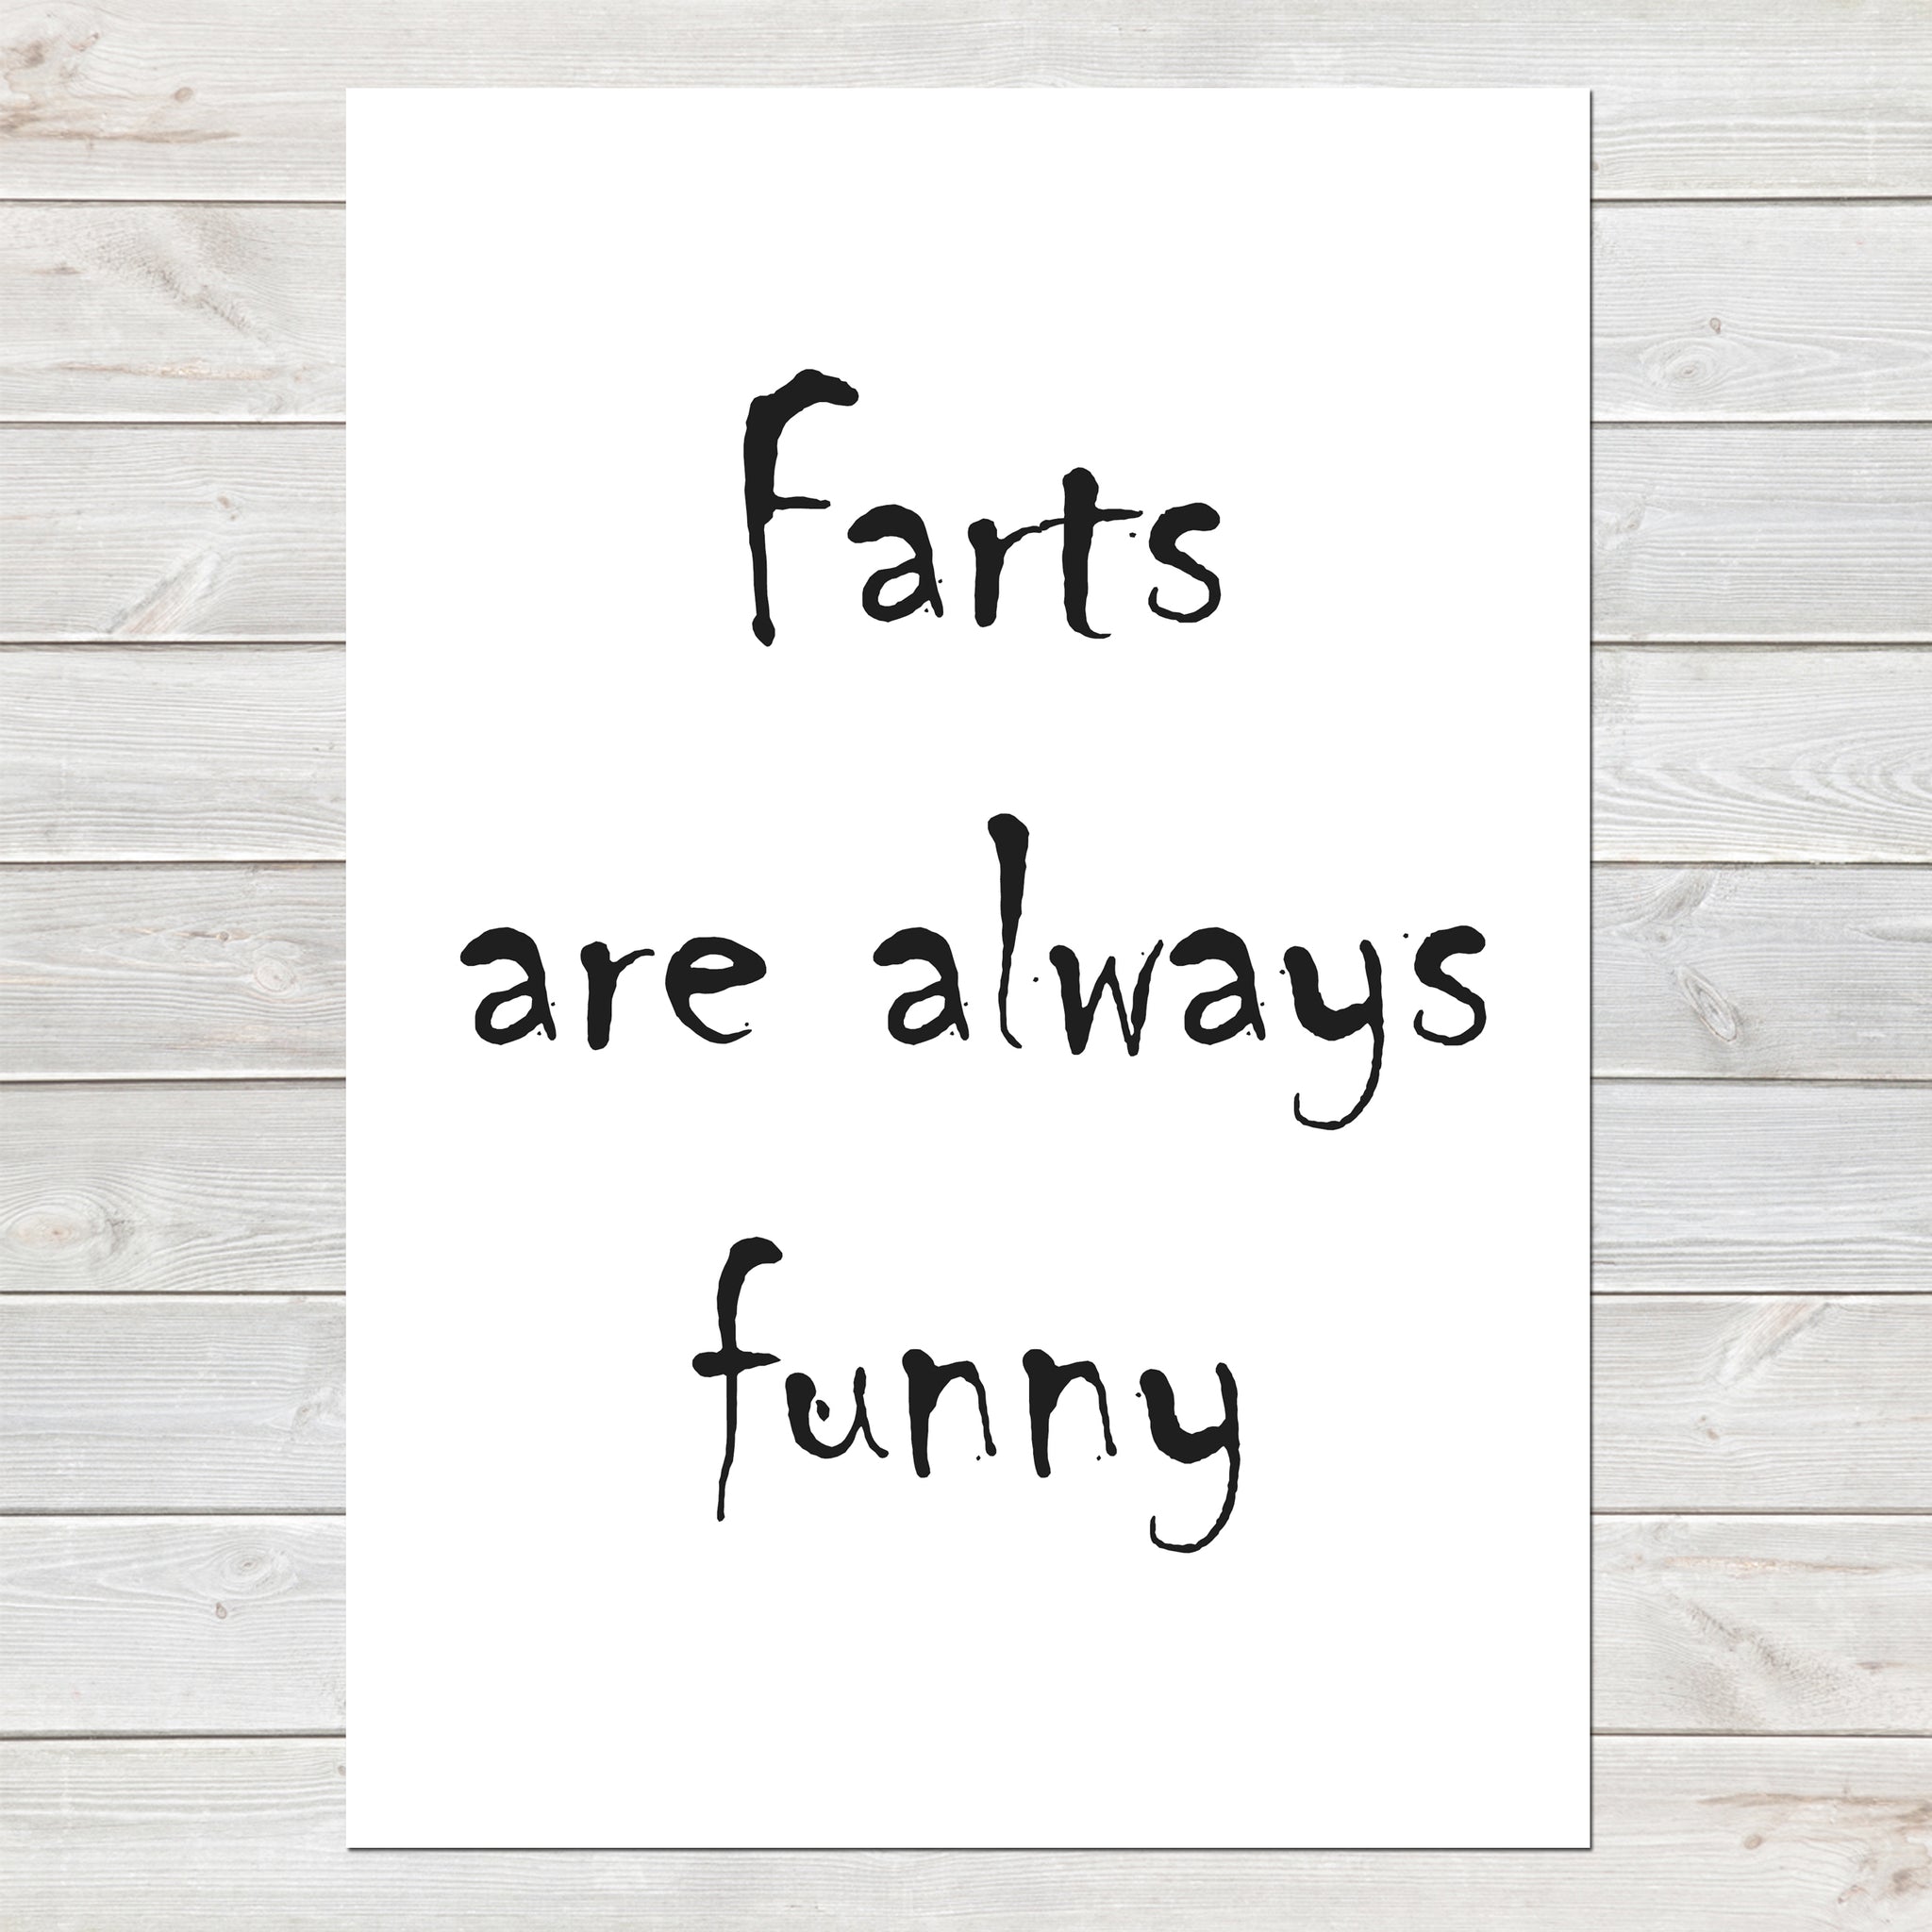 Farts Are Funny, Funny Home Gift, Bathroom Print/Poster